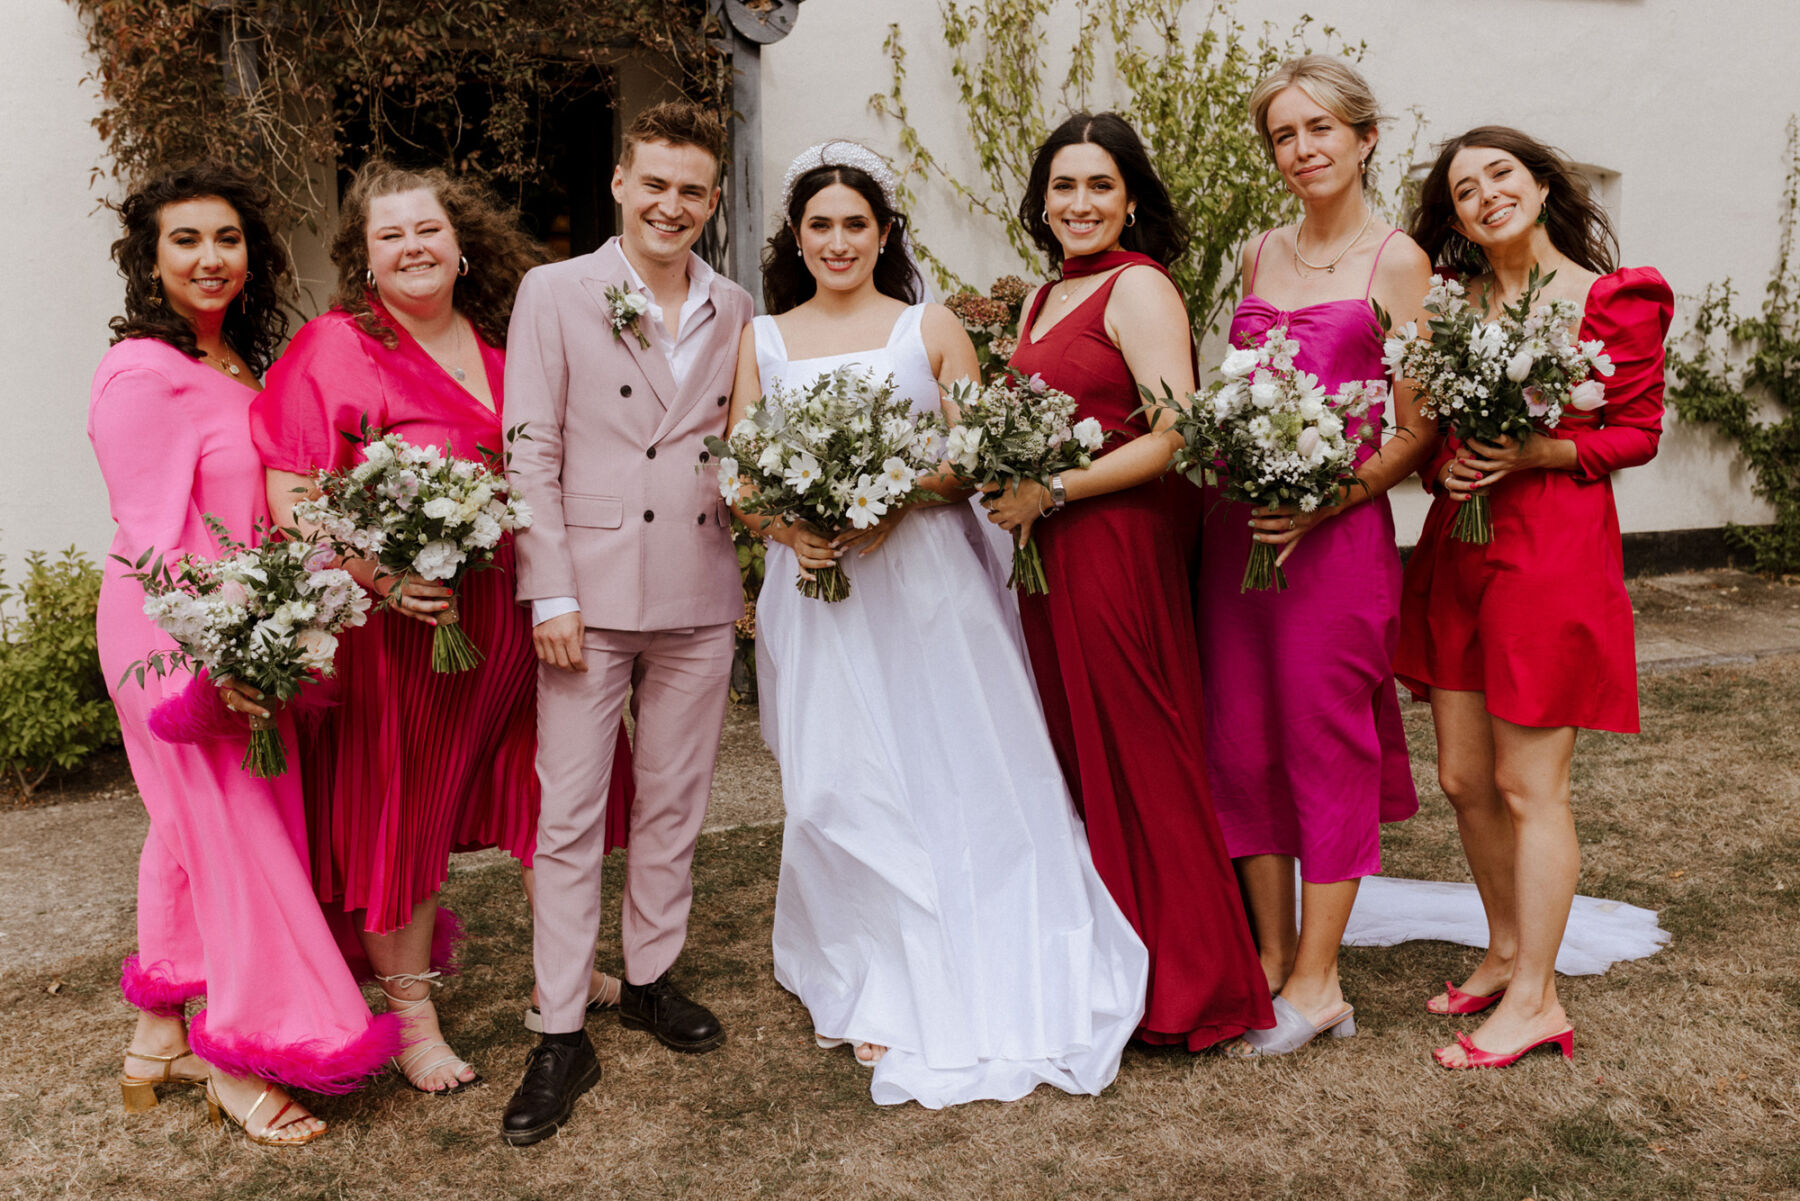 Bridesmaids in bright red and pink dresses. Male bridesmaid in a pale pink suit.